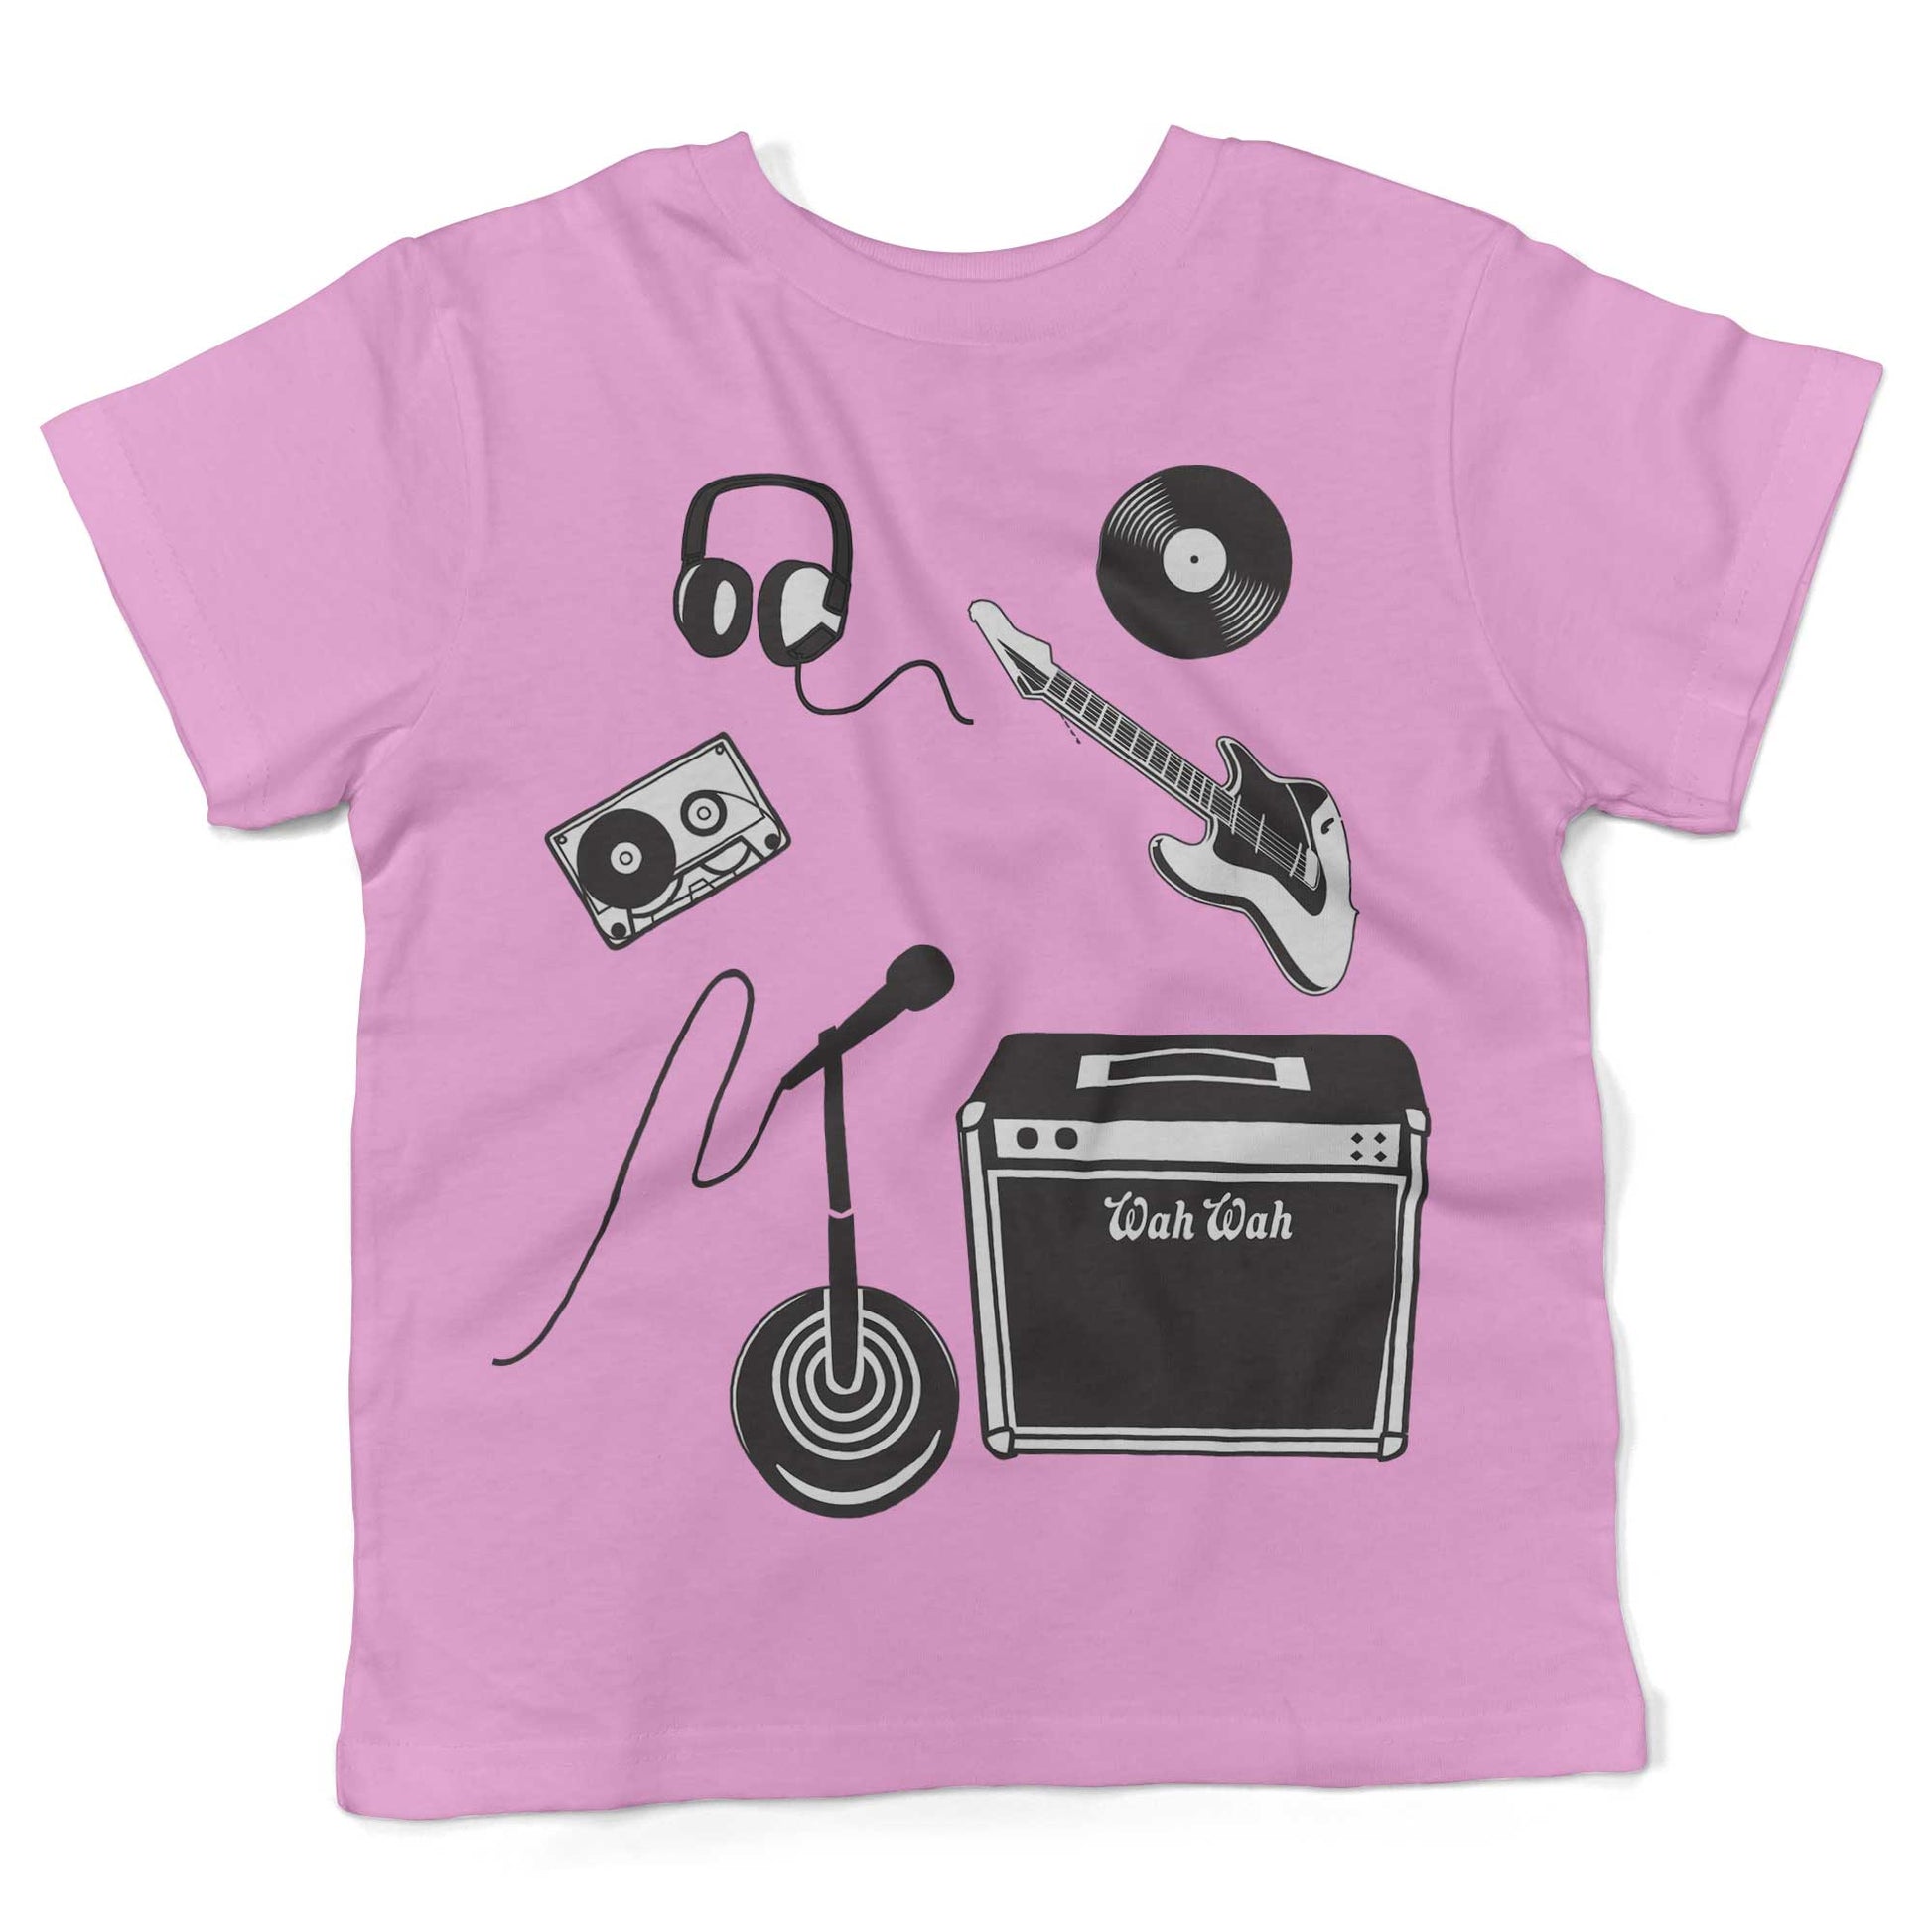 With The Band Toddler Shirt-Organic Pink-2T